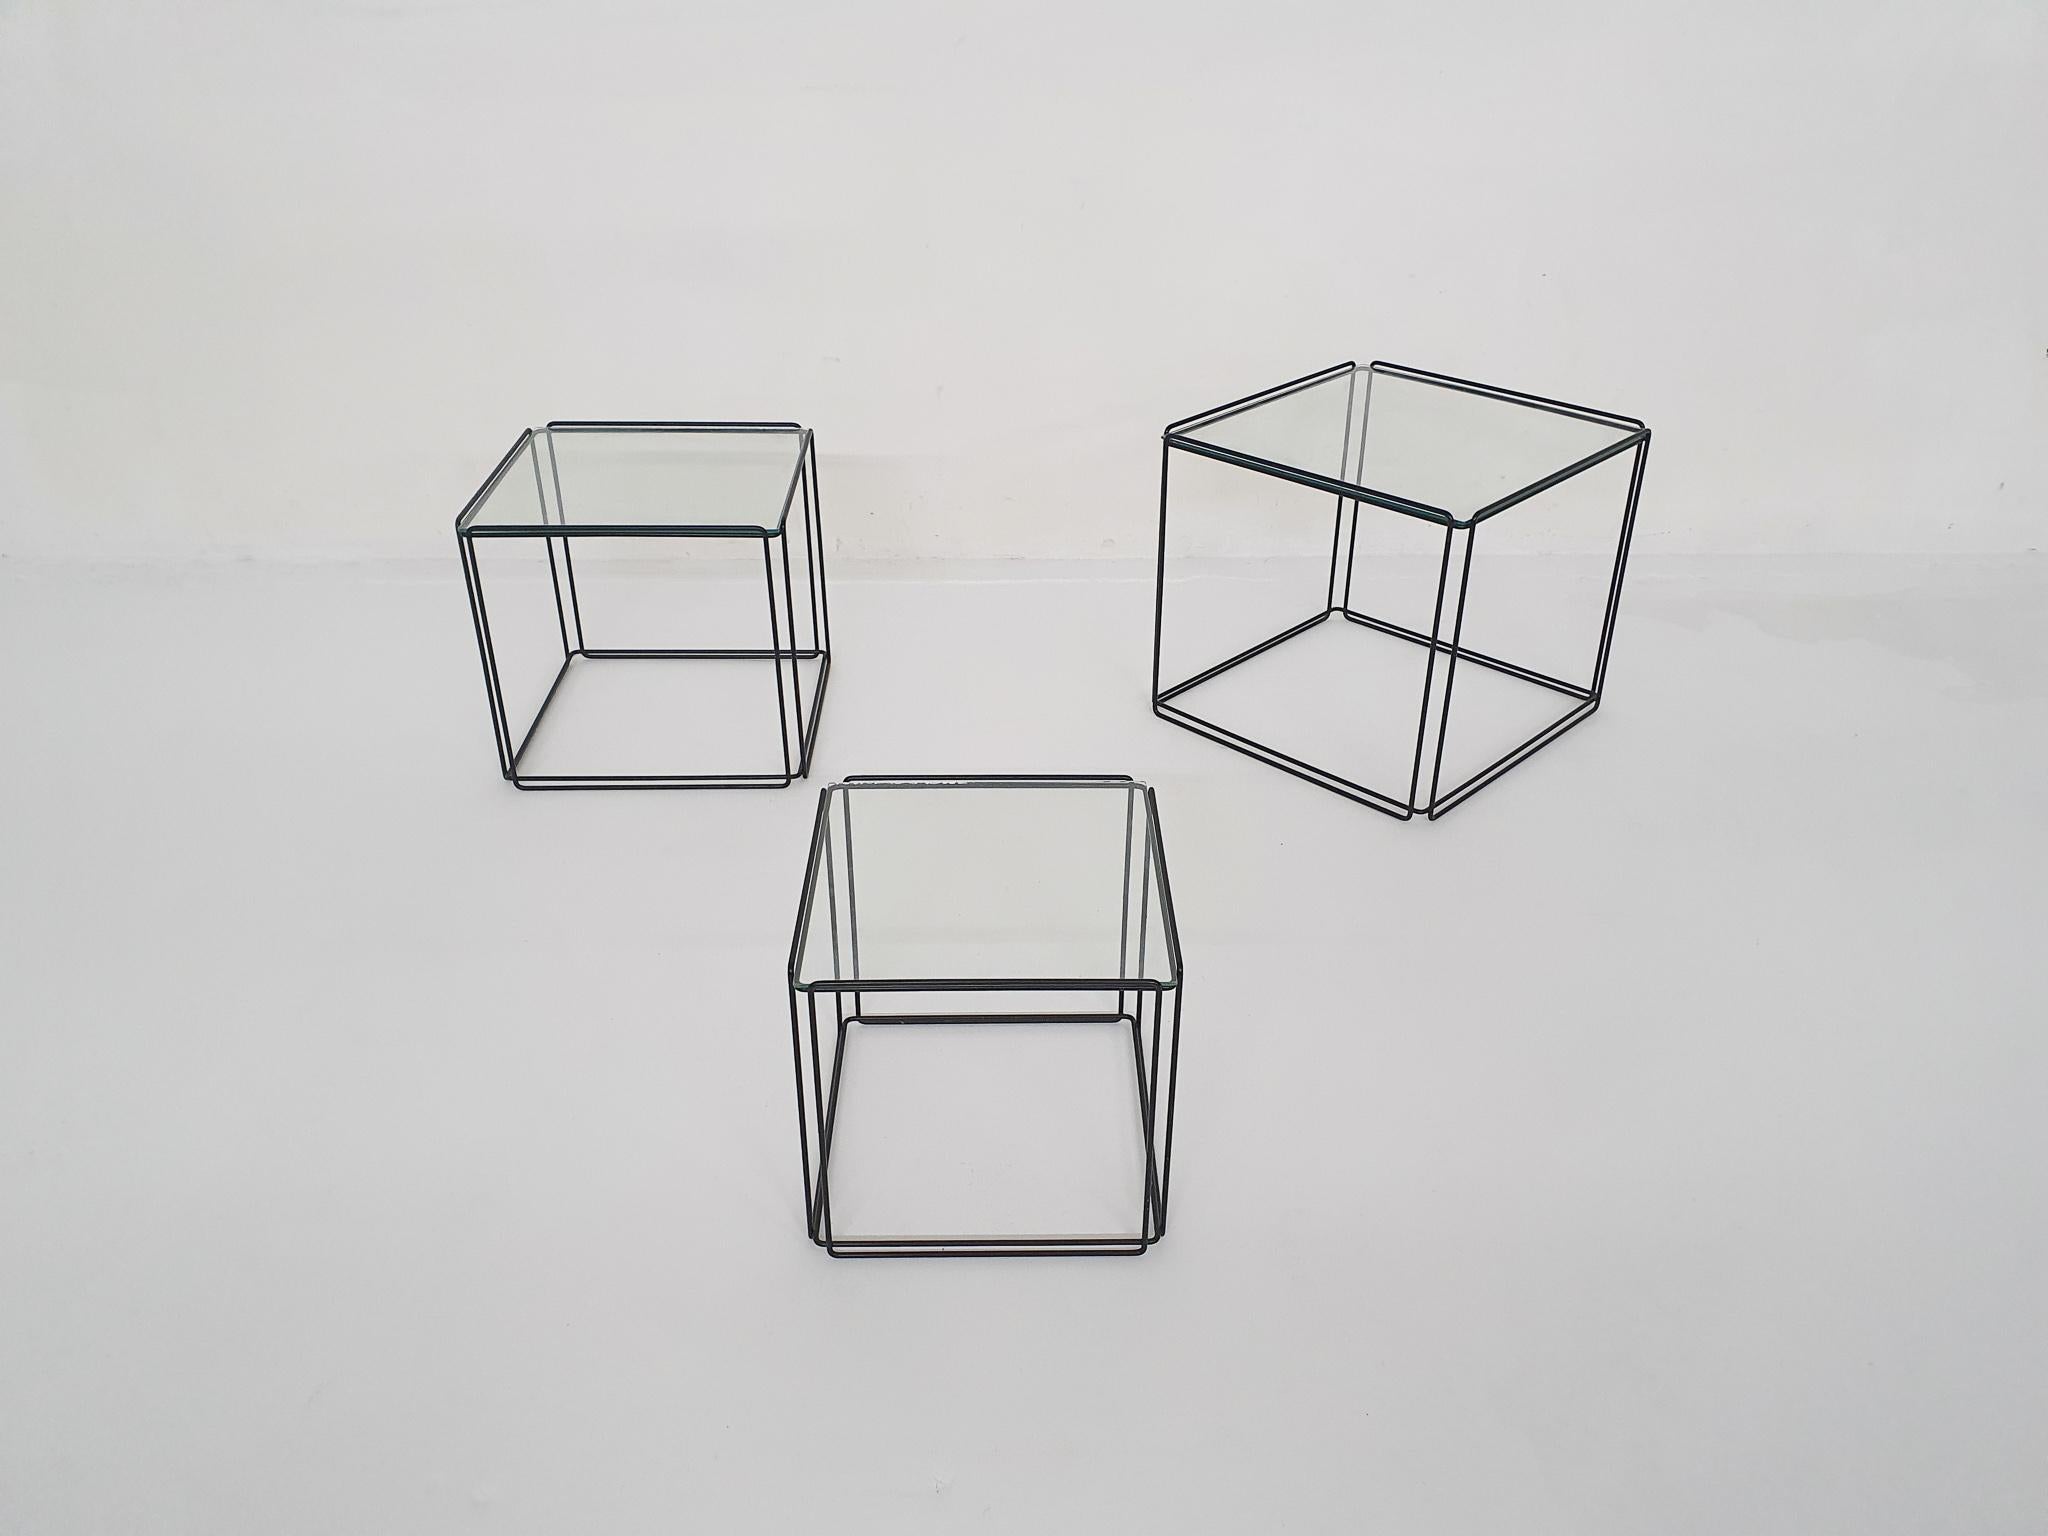 Black metal minimalistic side tables with glass top.
In good condition.